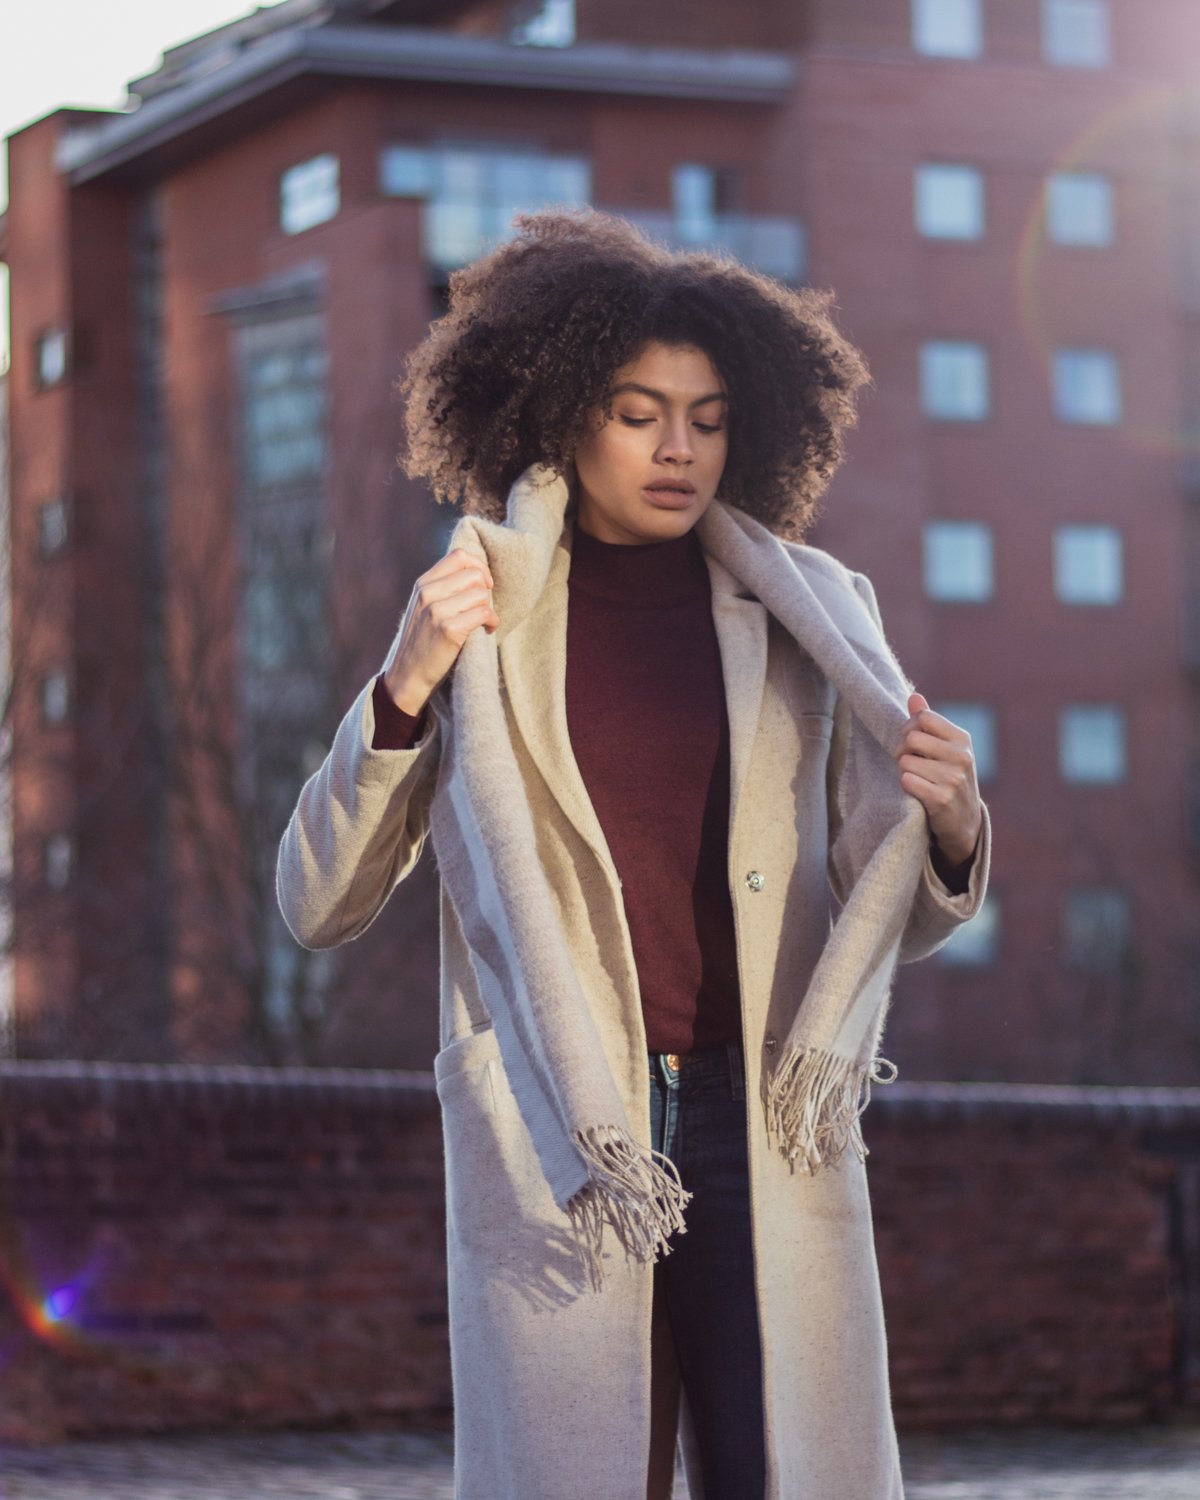 Oatmeal slim coat and scarf minimal style winter outfit